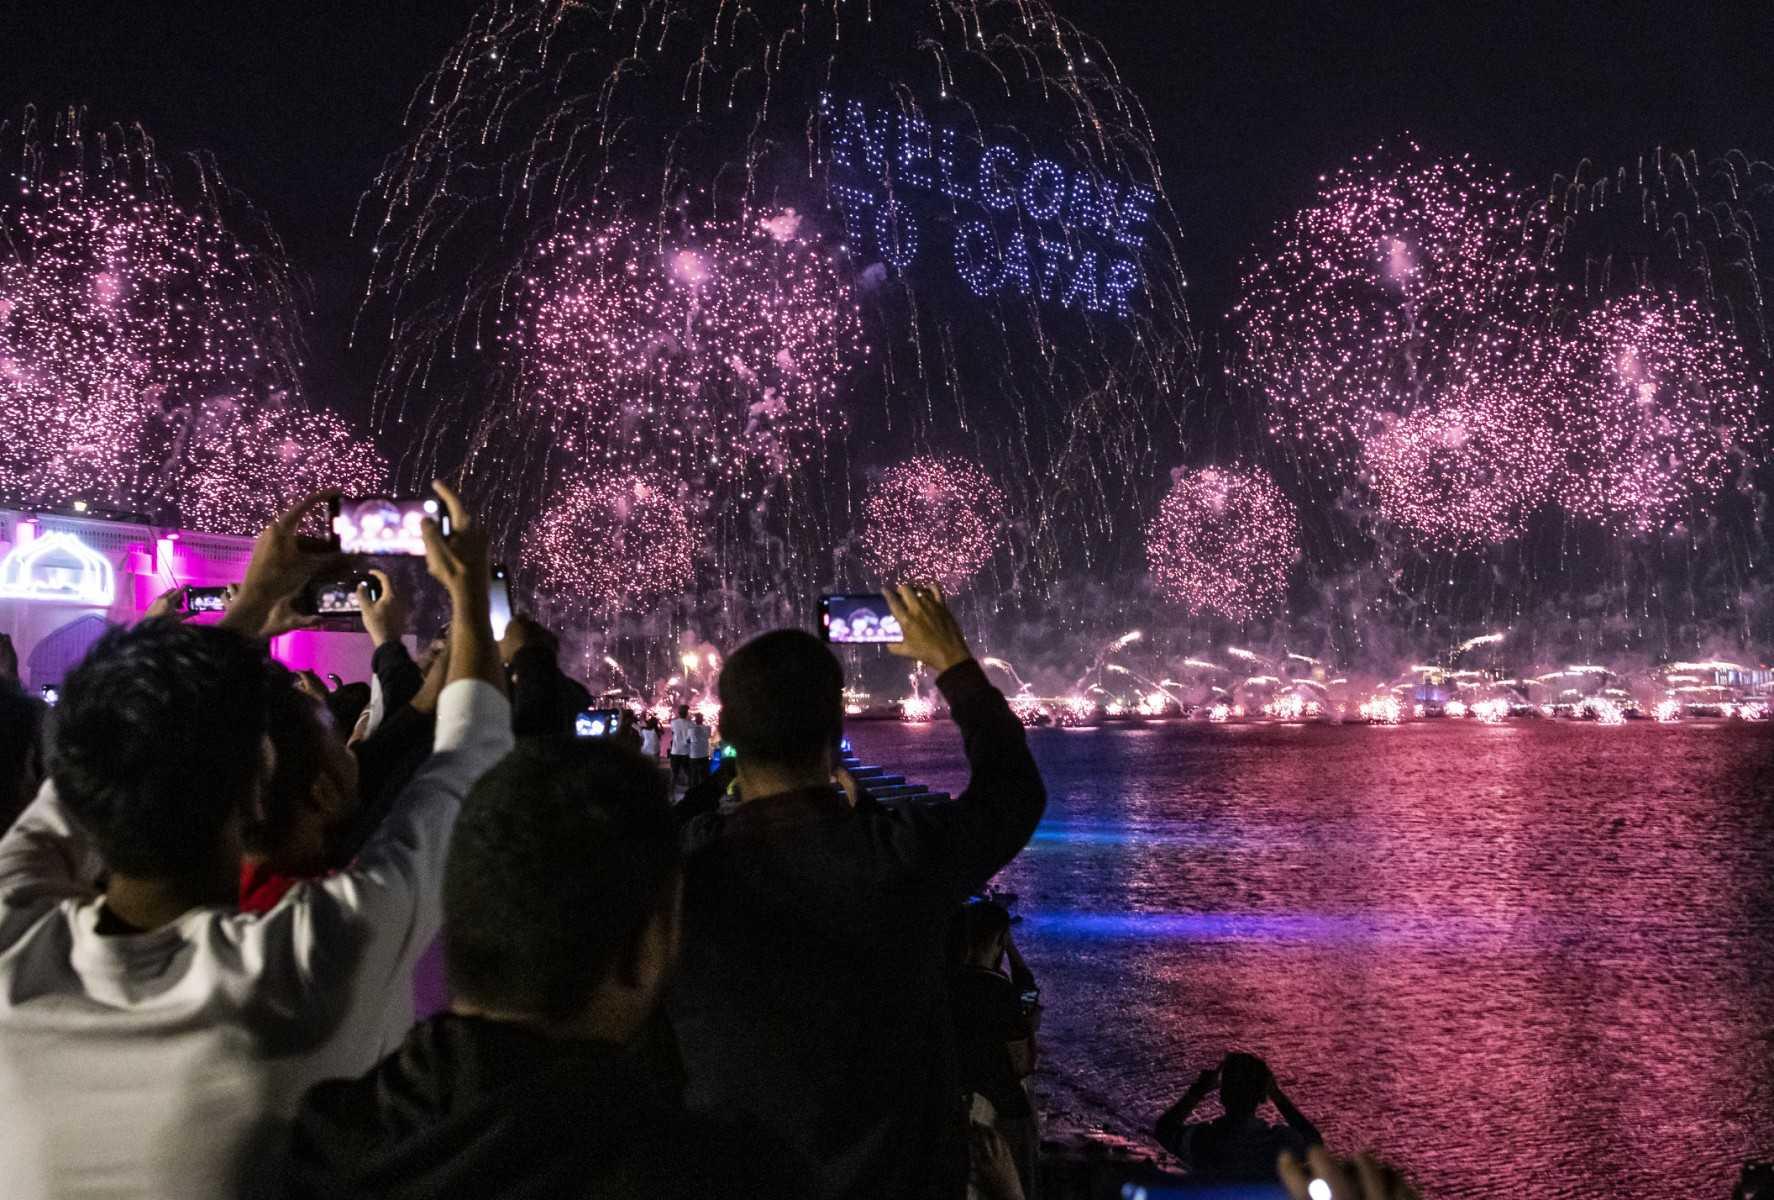 Fireworks explode in the sky in Doha on Nov 20, during the opening day of the Qatar 2022 World Cup football tournament. Photo: AFP